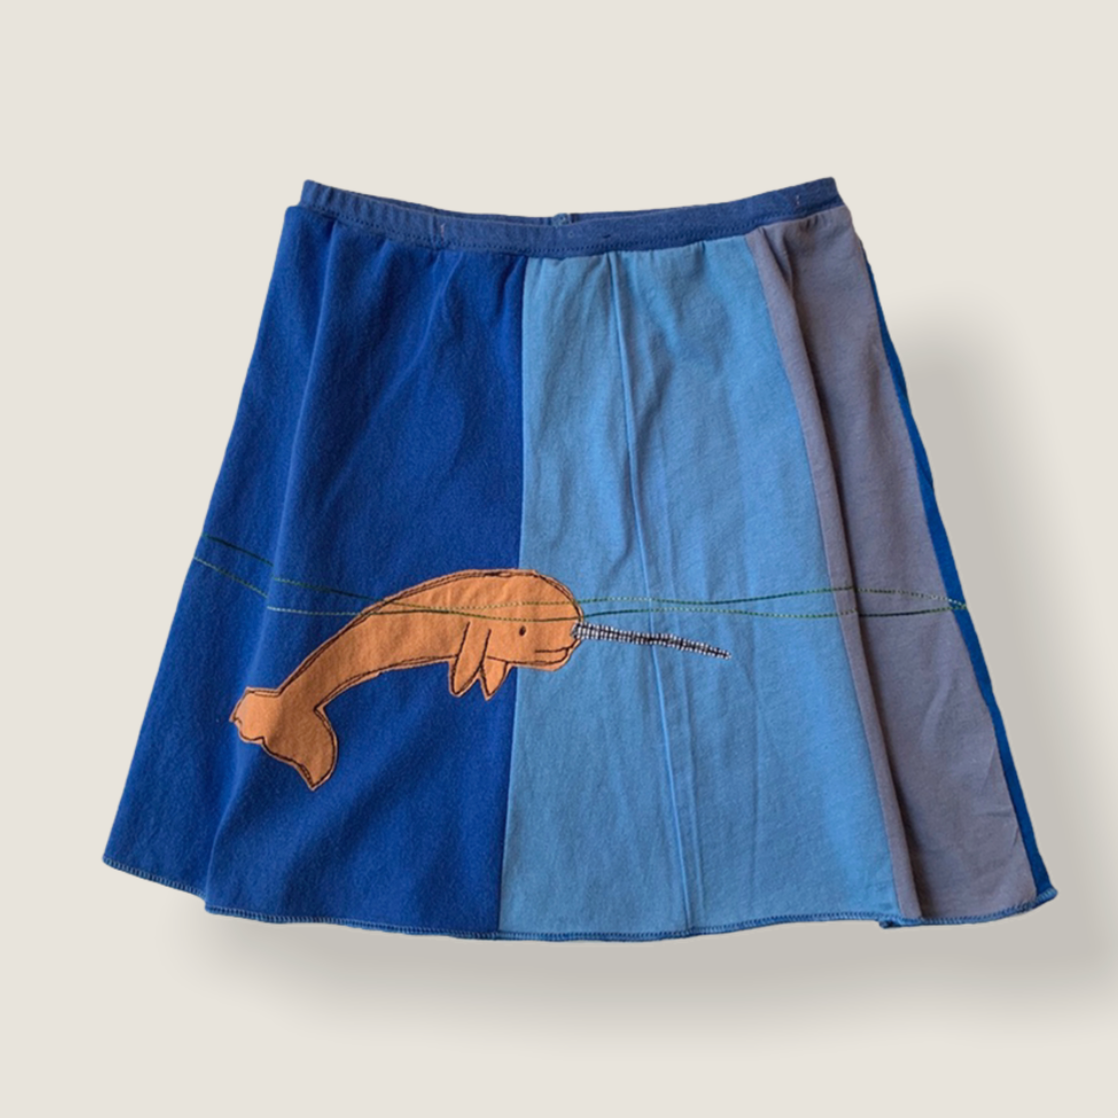 Youth Skirt - Applique Narwhal